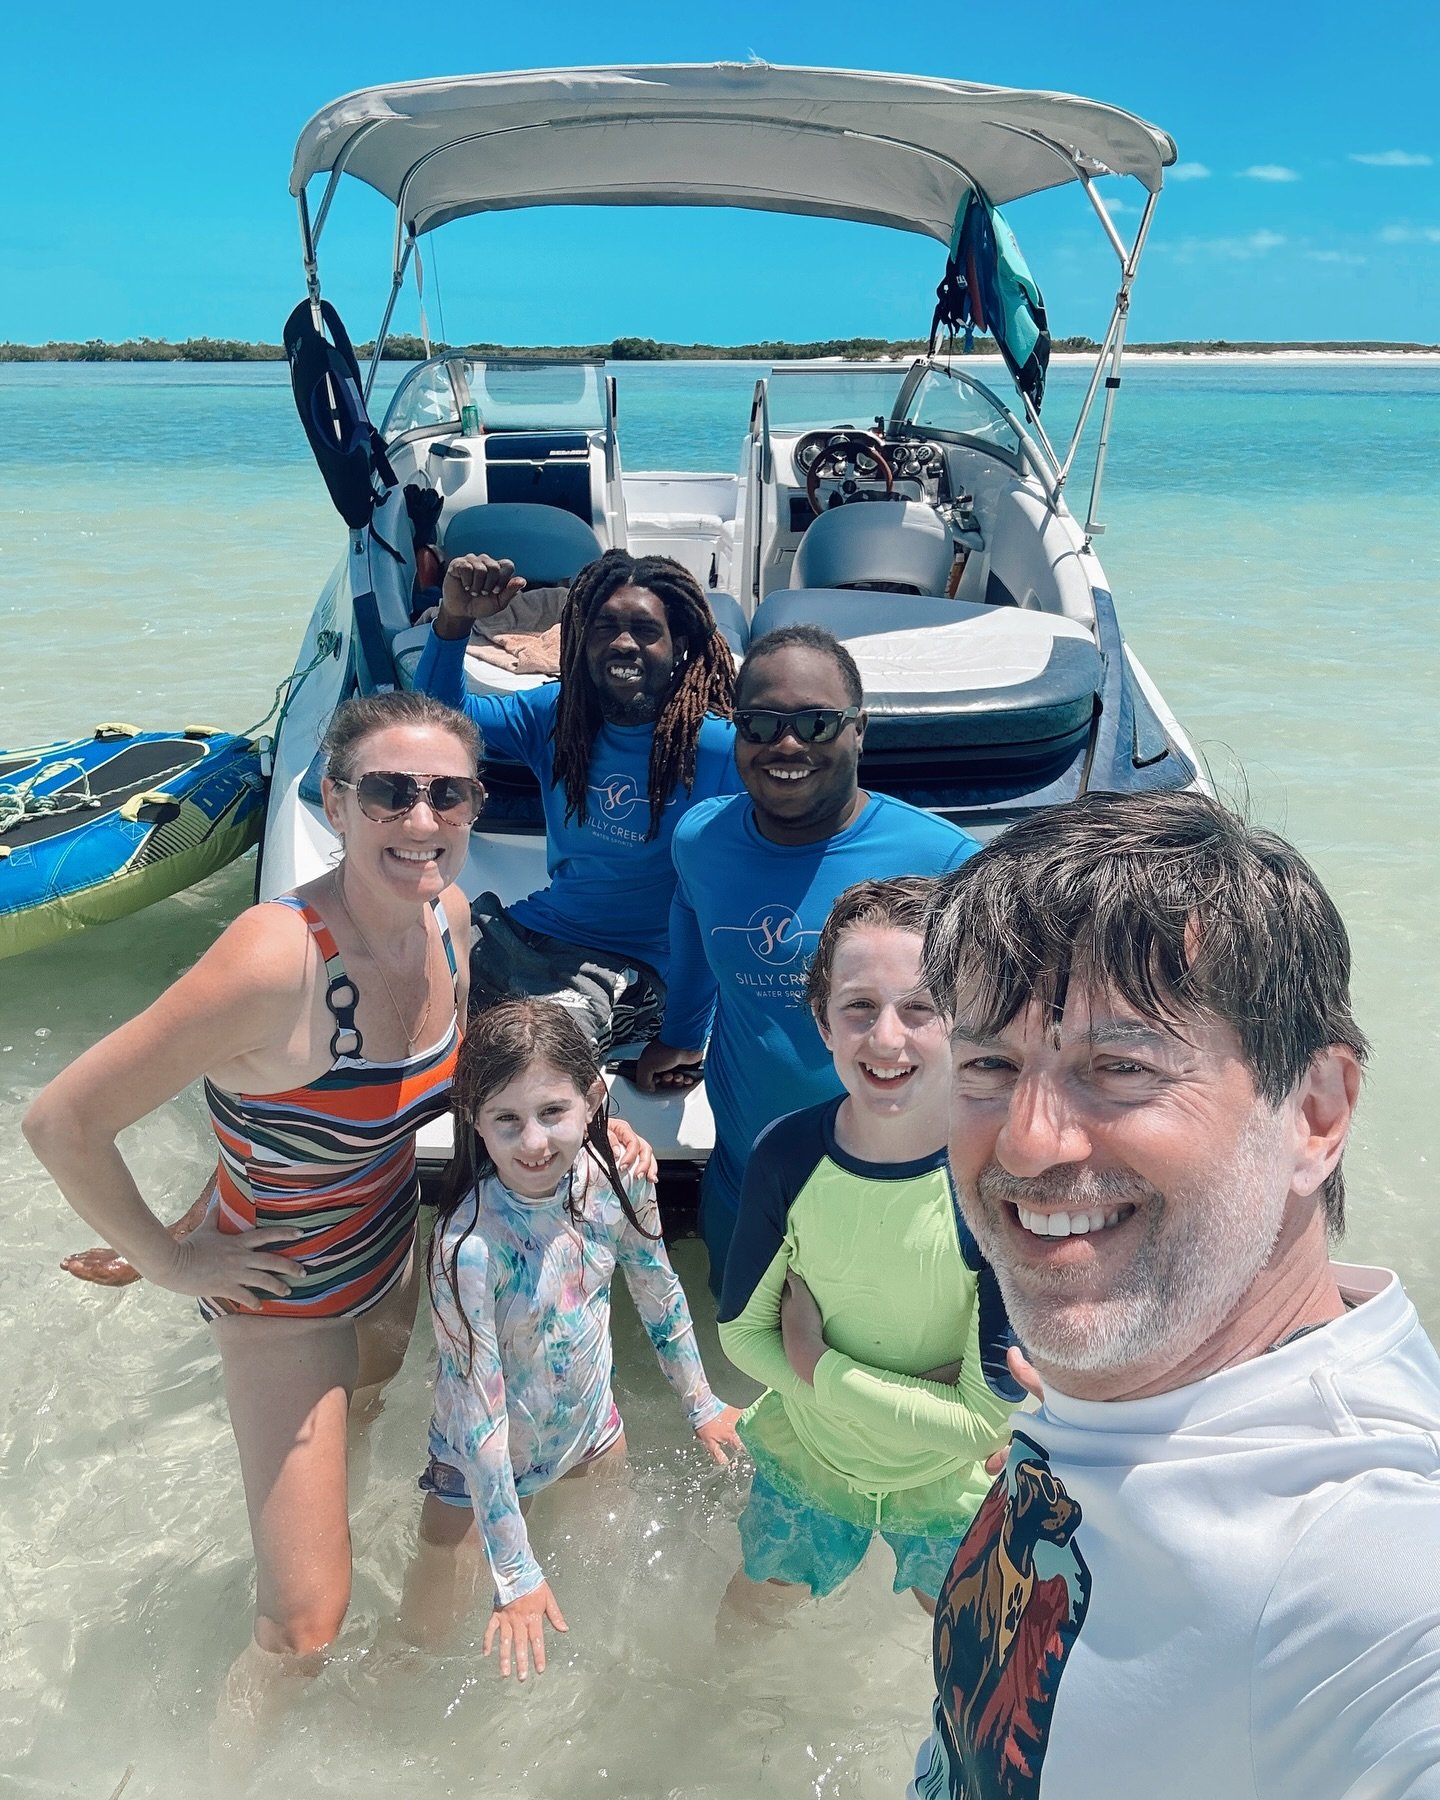 This is what vacation dreams are made of! ☀️🌊 The perfect combination of relaxation, adventure, and unforgettable moments.

silly creek water sports | turks and caicos | private boat charter | boat tours | day trips from providenciales | things to d